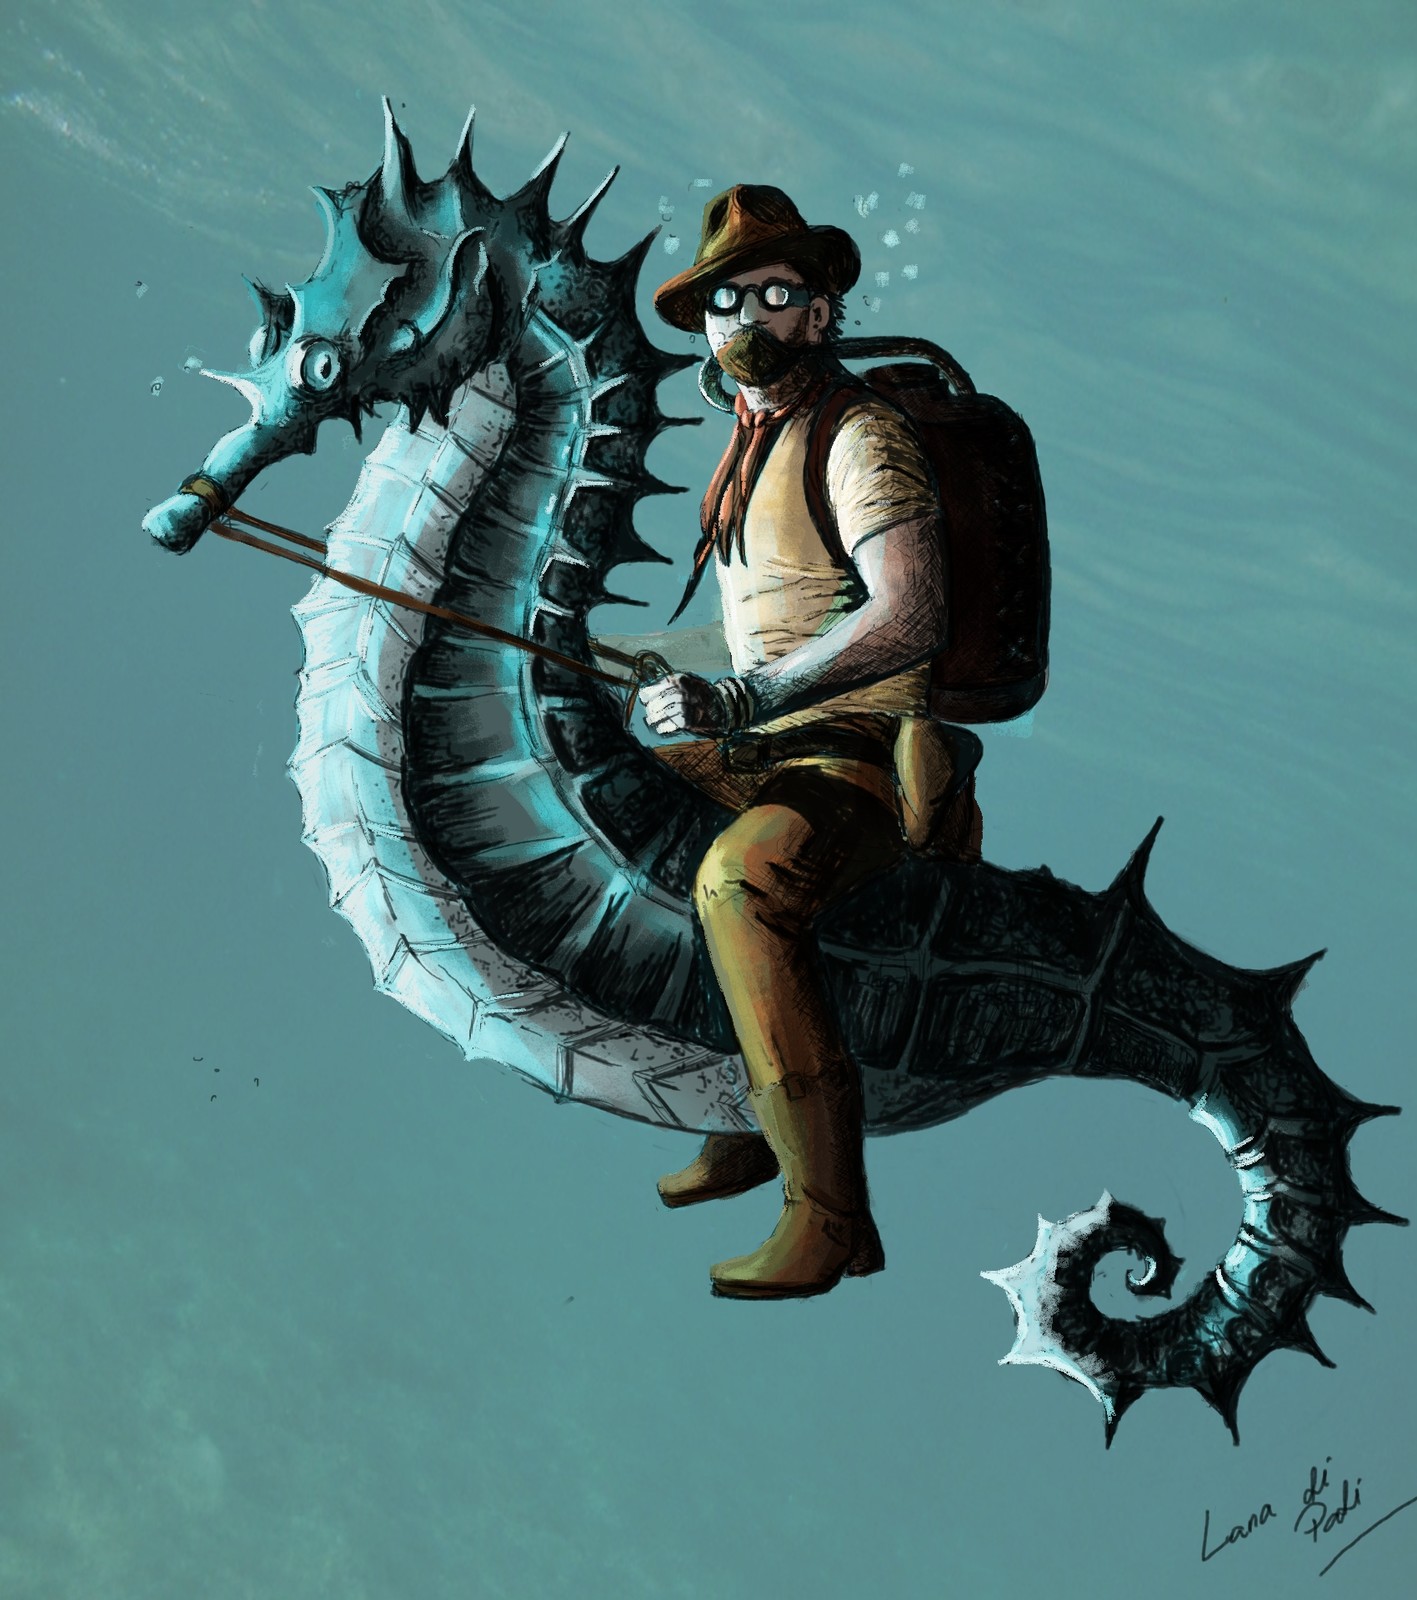 The Drover. Riding their seahorses through the warm shallow waters of the American Pacific, he and his companions drove sea cows, or manatees, that the colonists brought here from Florida to graze them on the seagrass meadows of the continental shelf.